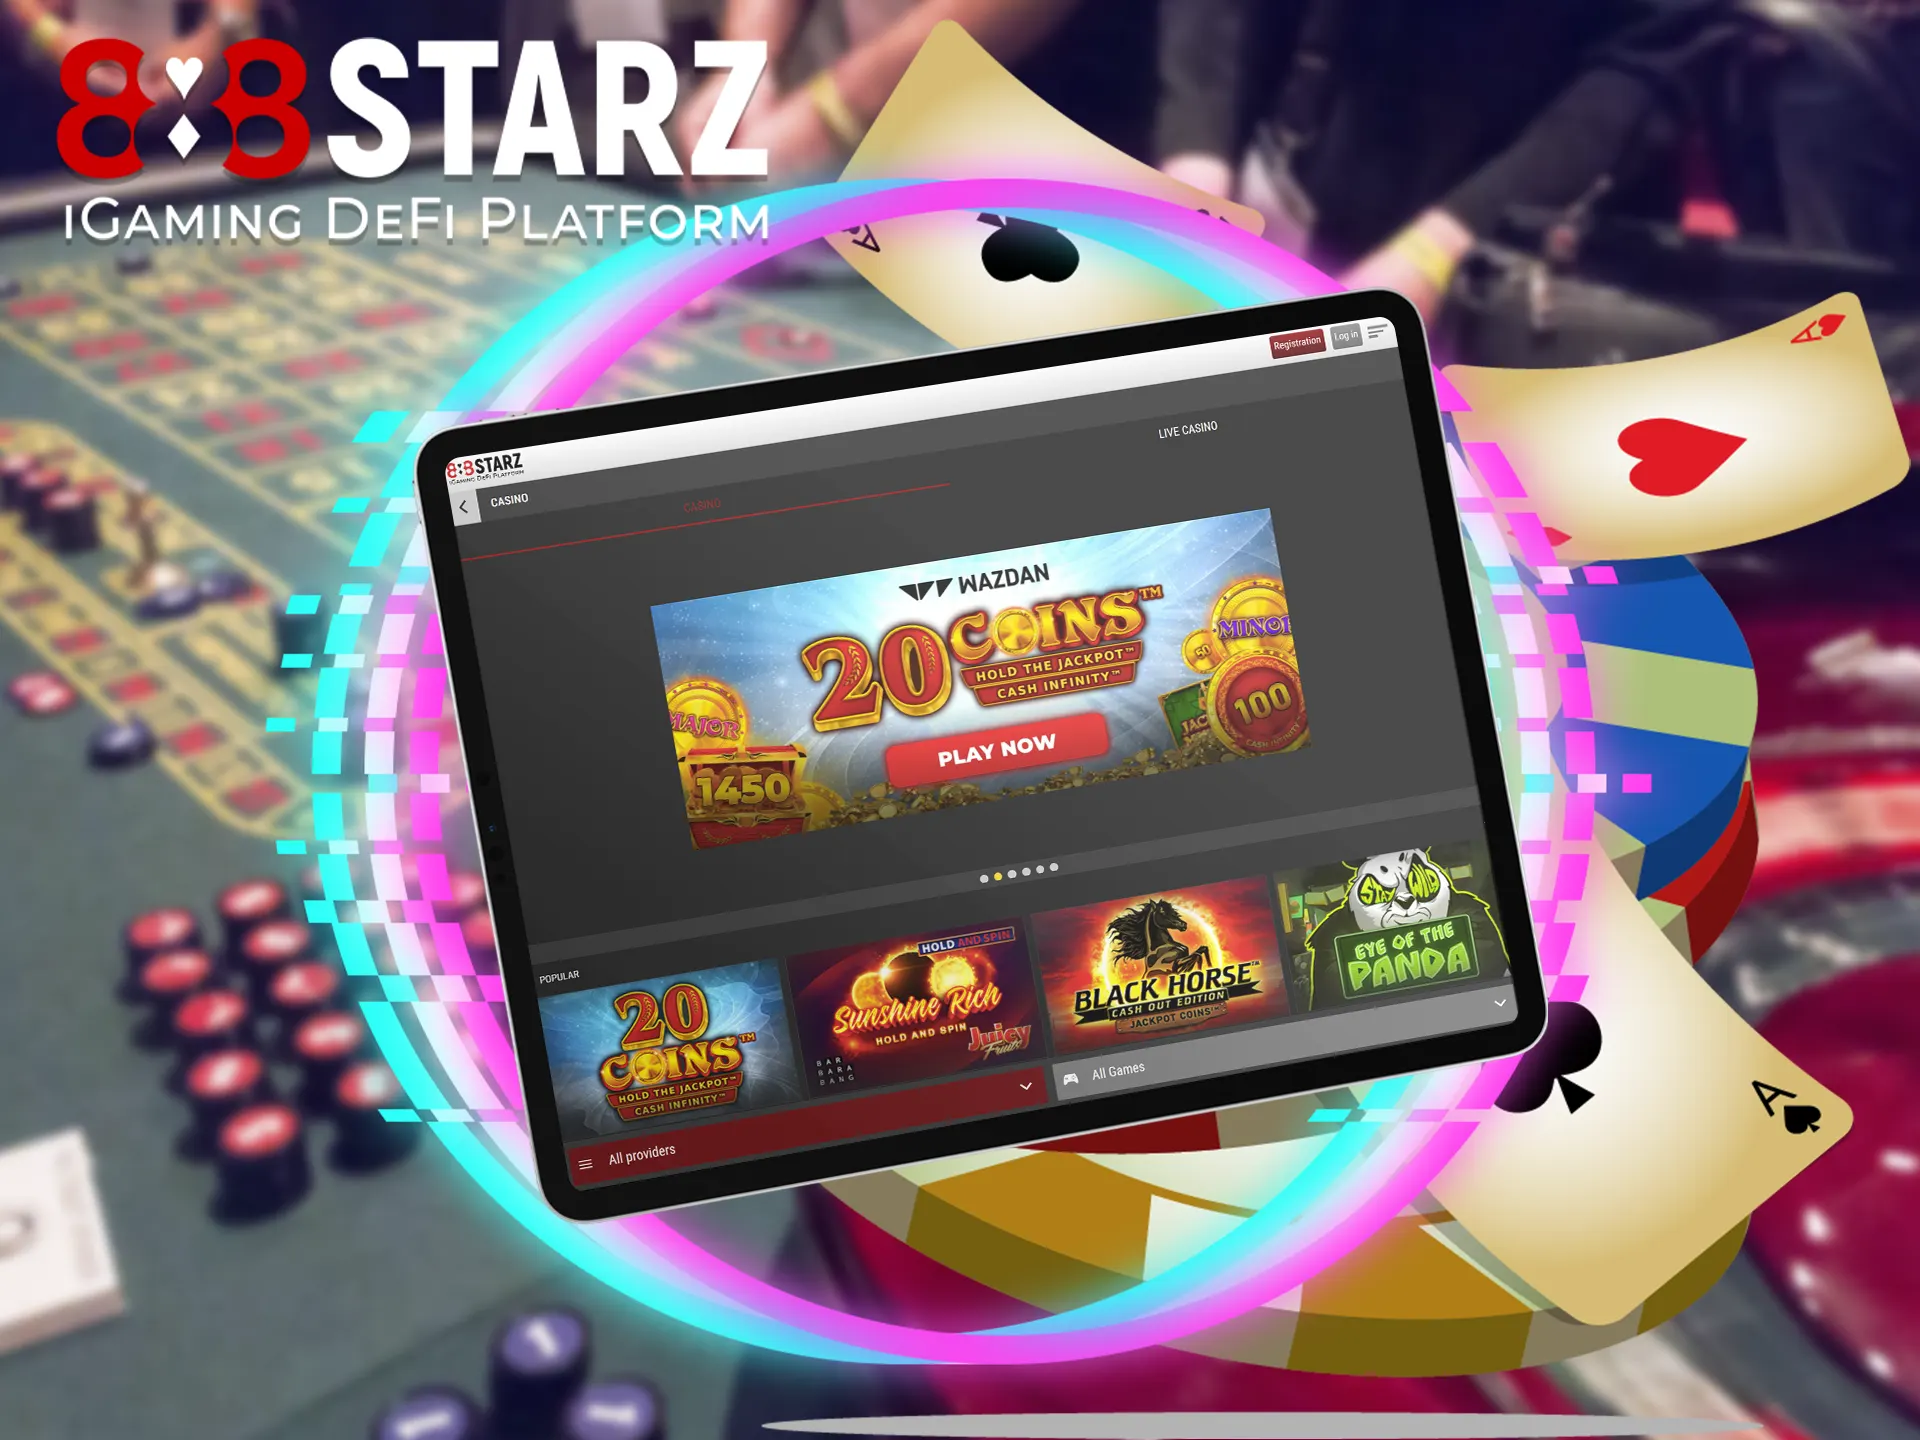 Get access to the gambling section after installing the 888starz app on your smartphone.